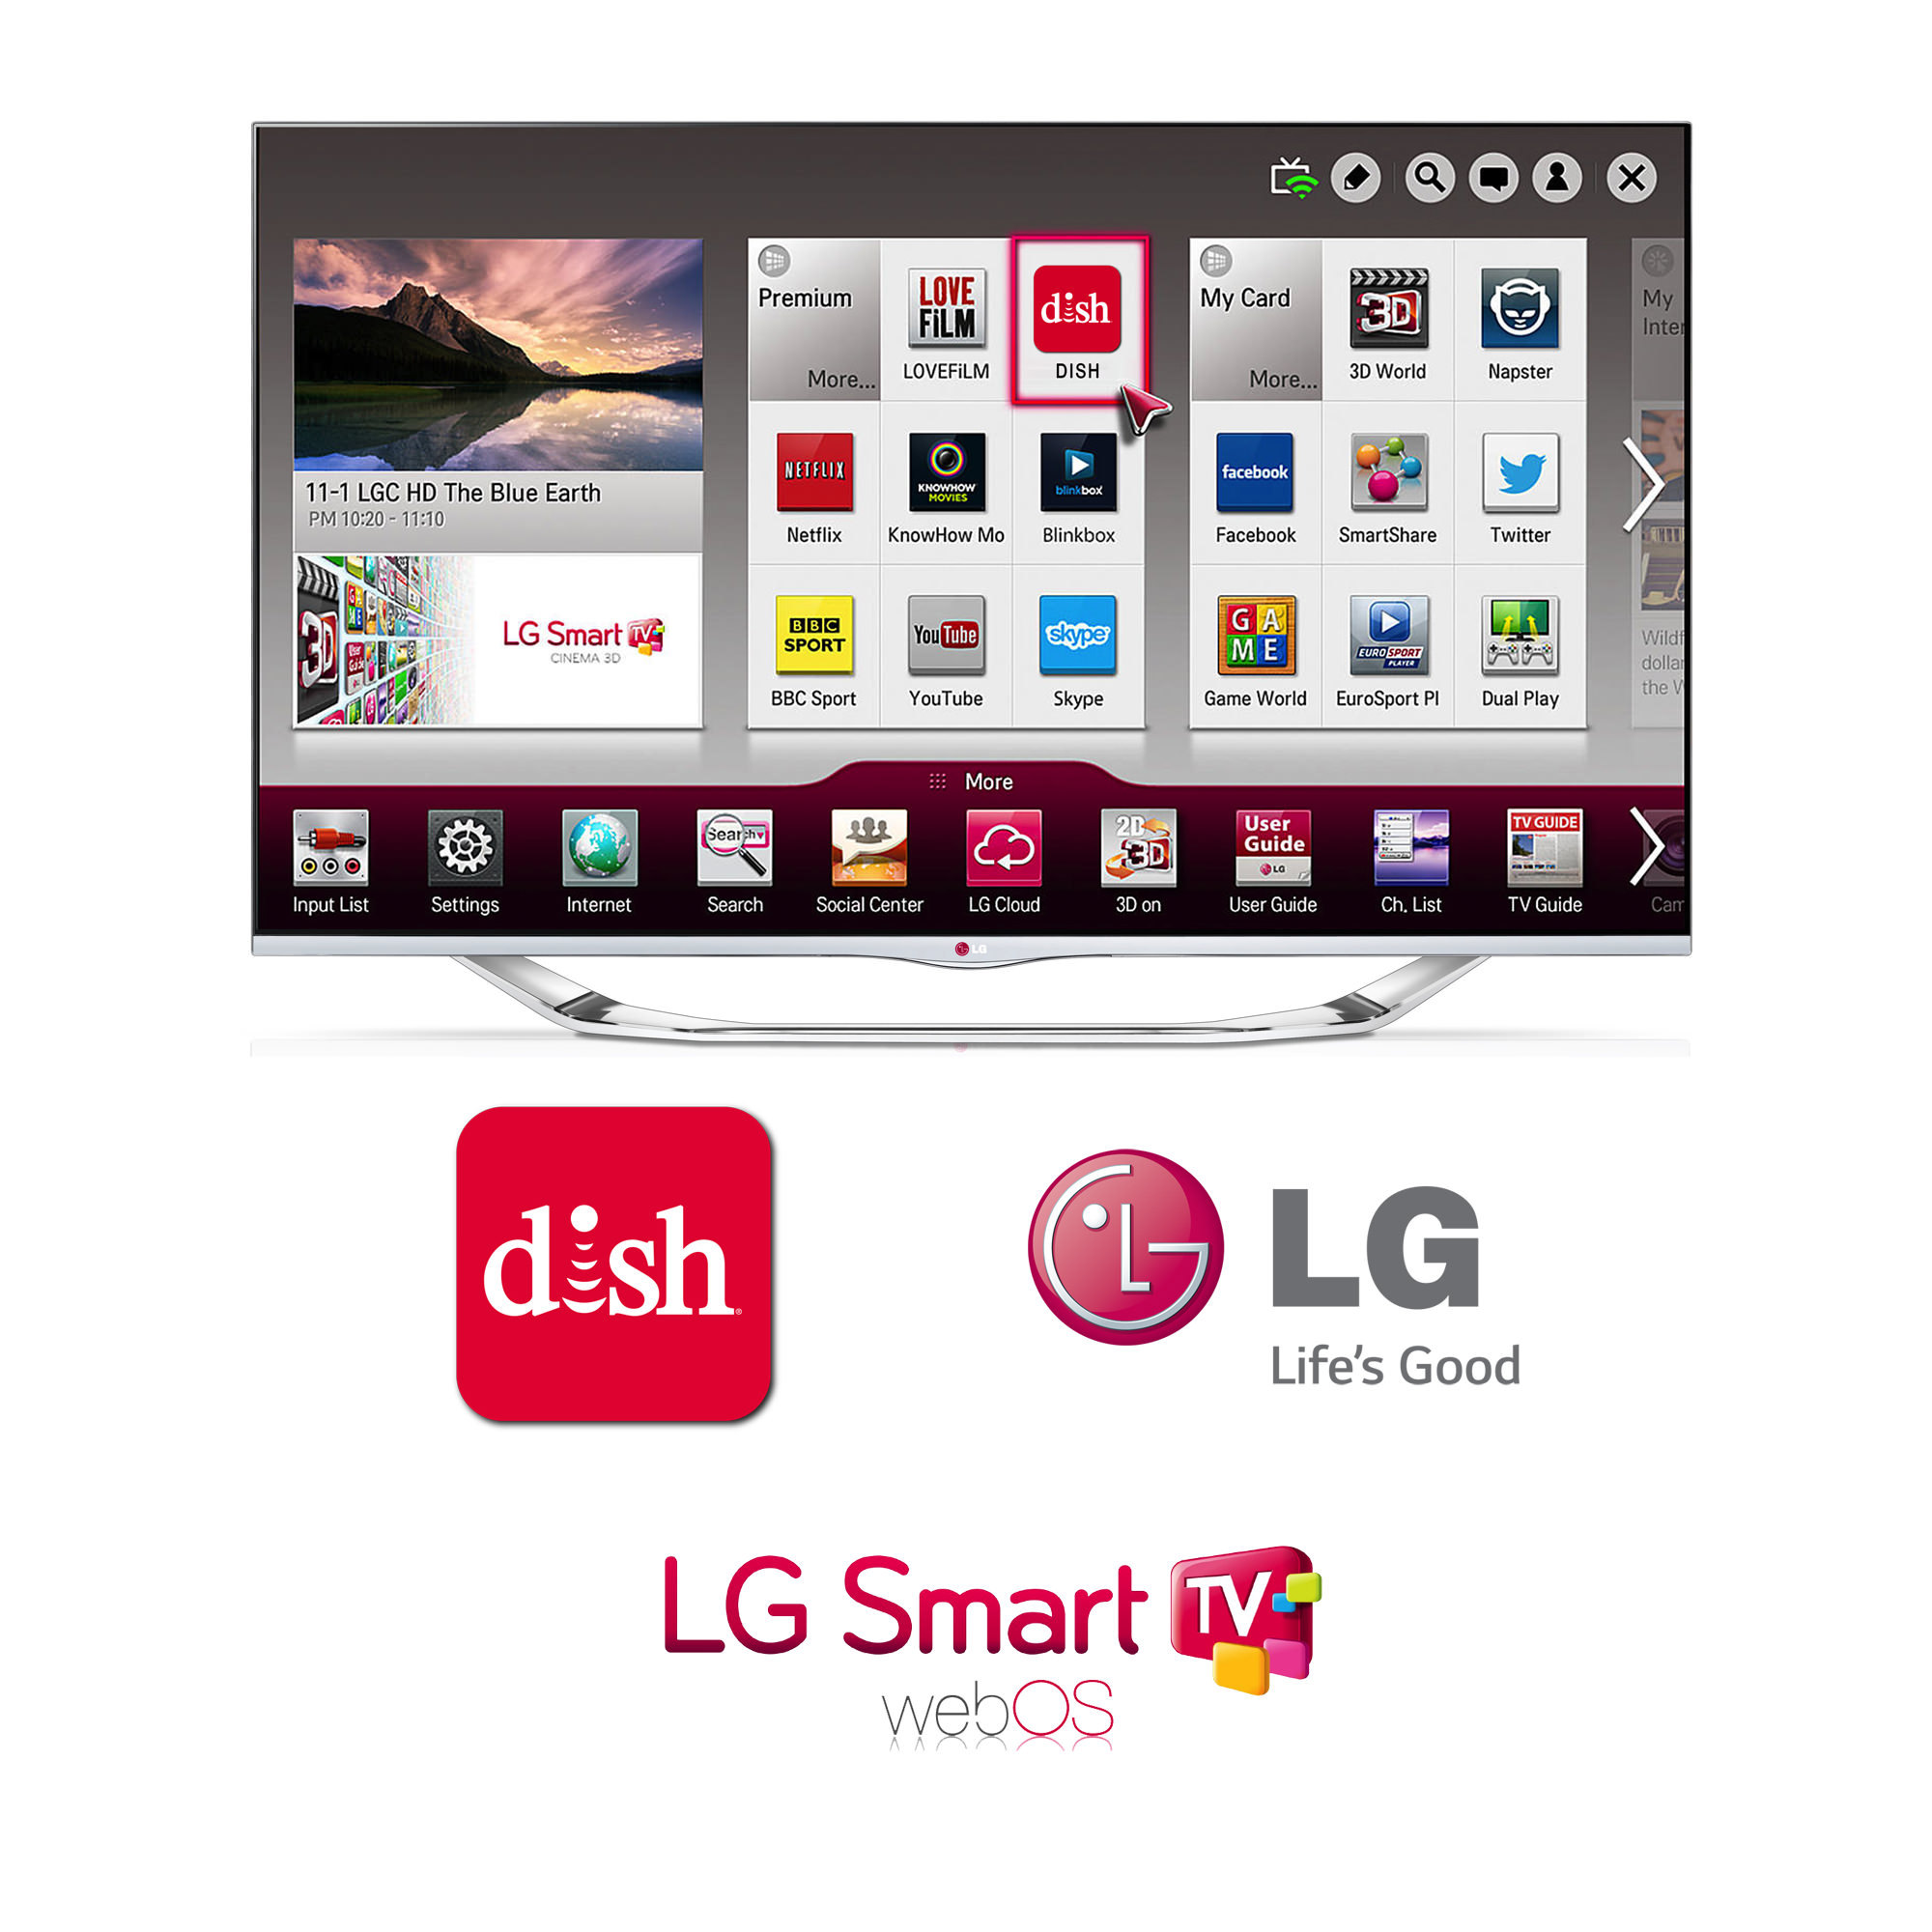 DISH App Delivers Hopper Experience on LG Smart TVs ... dish network joey wiring diagram 